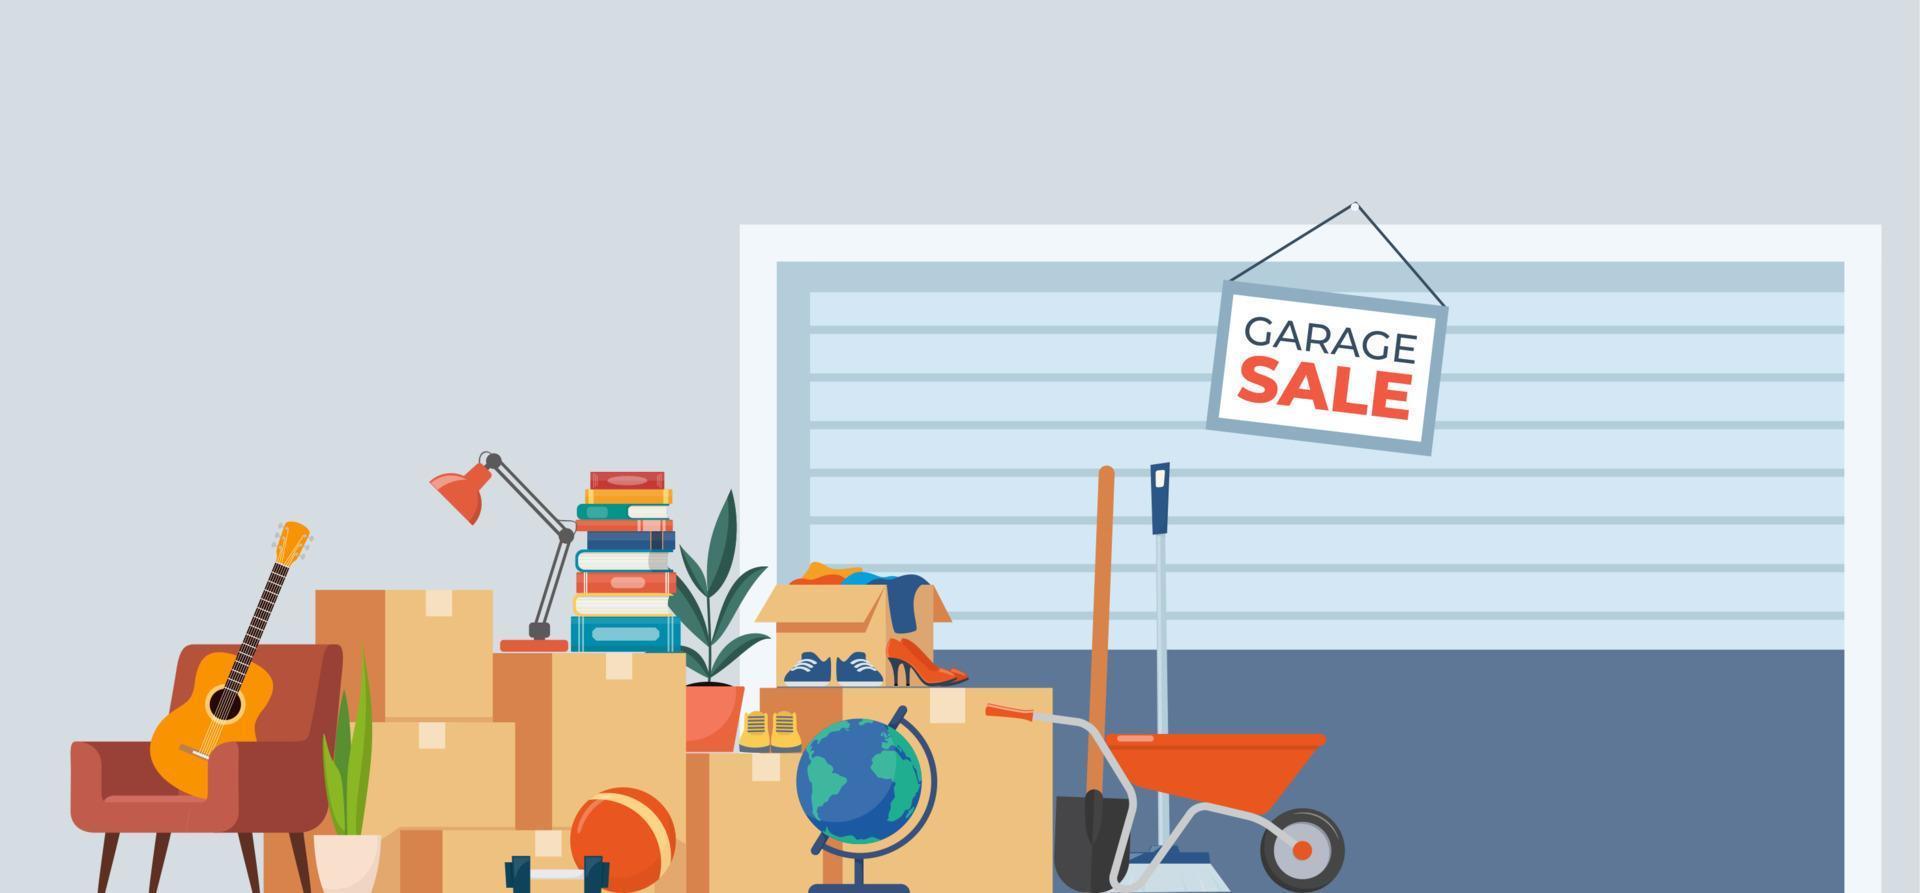 Garage sale background with furniture and accessory. House plants, guitar, books, clothes, chair and others. Flea market old stuff clutter. Vector illustration.